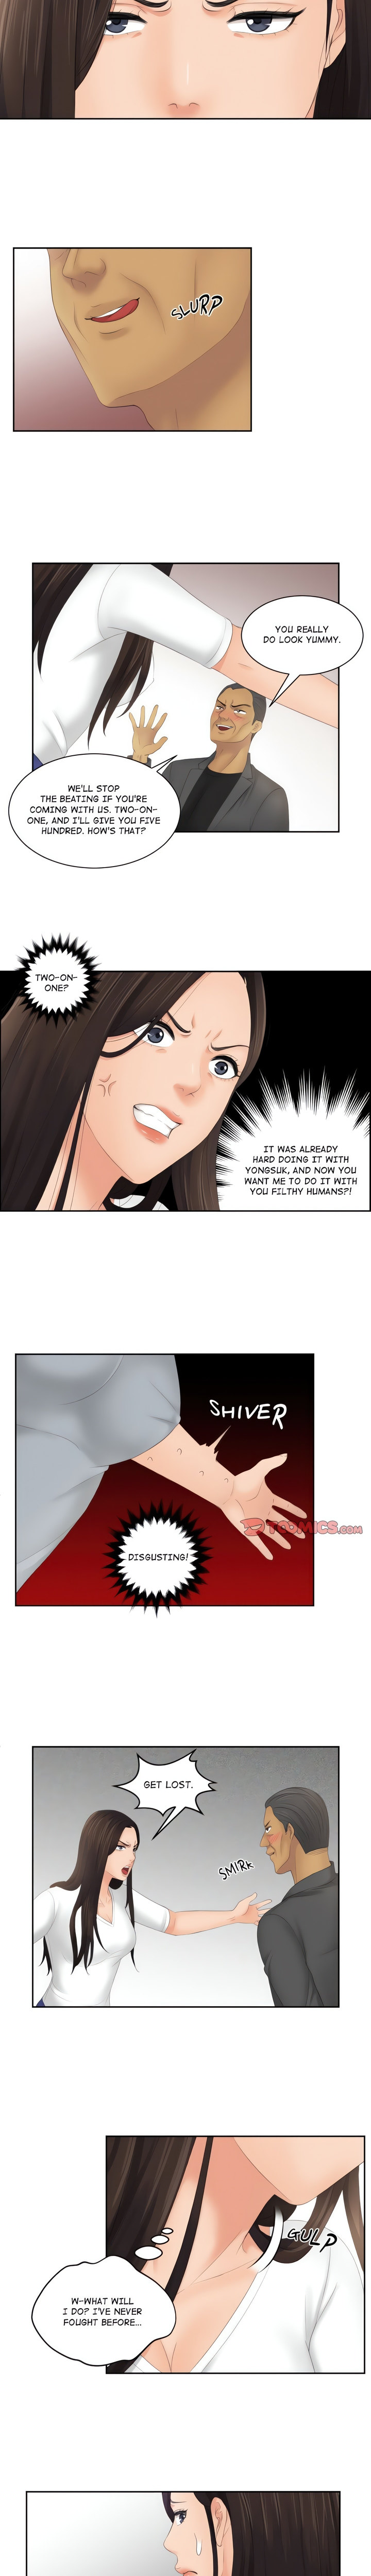 My Love Companion - Chapter 12 Page 5